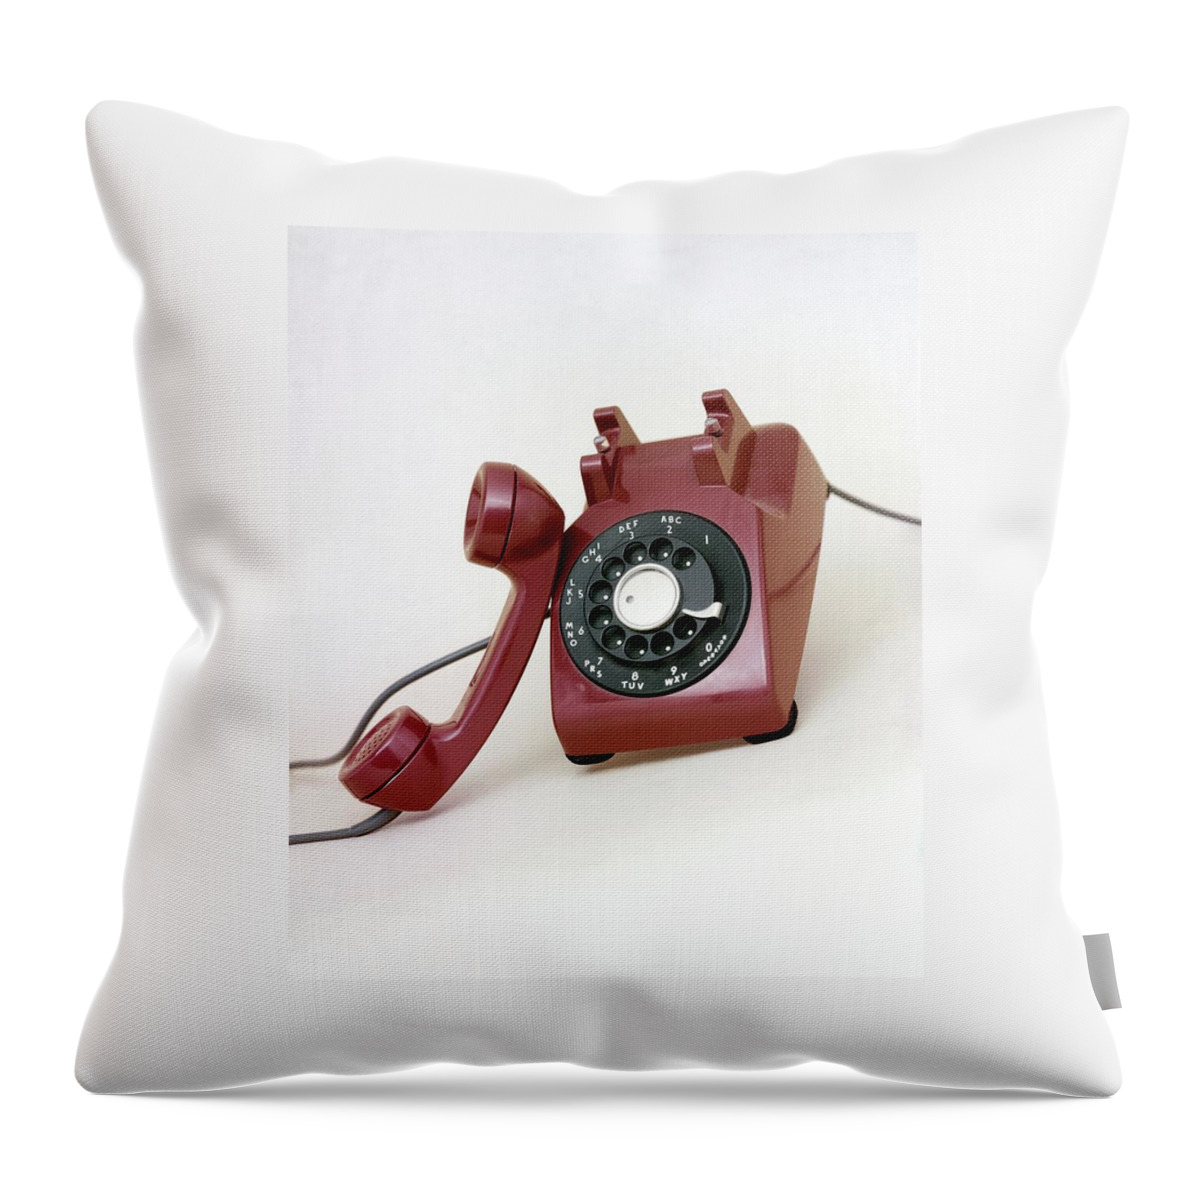 An Old Telephone Throw Pillow